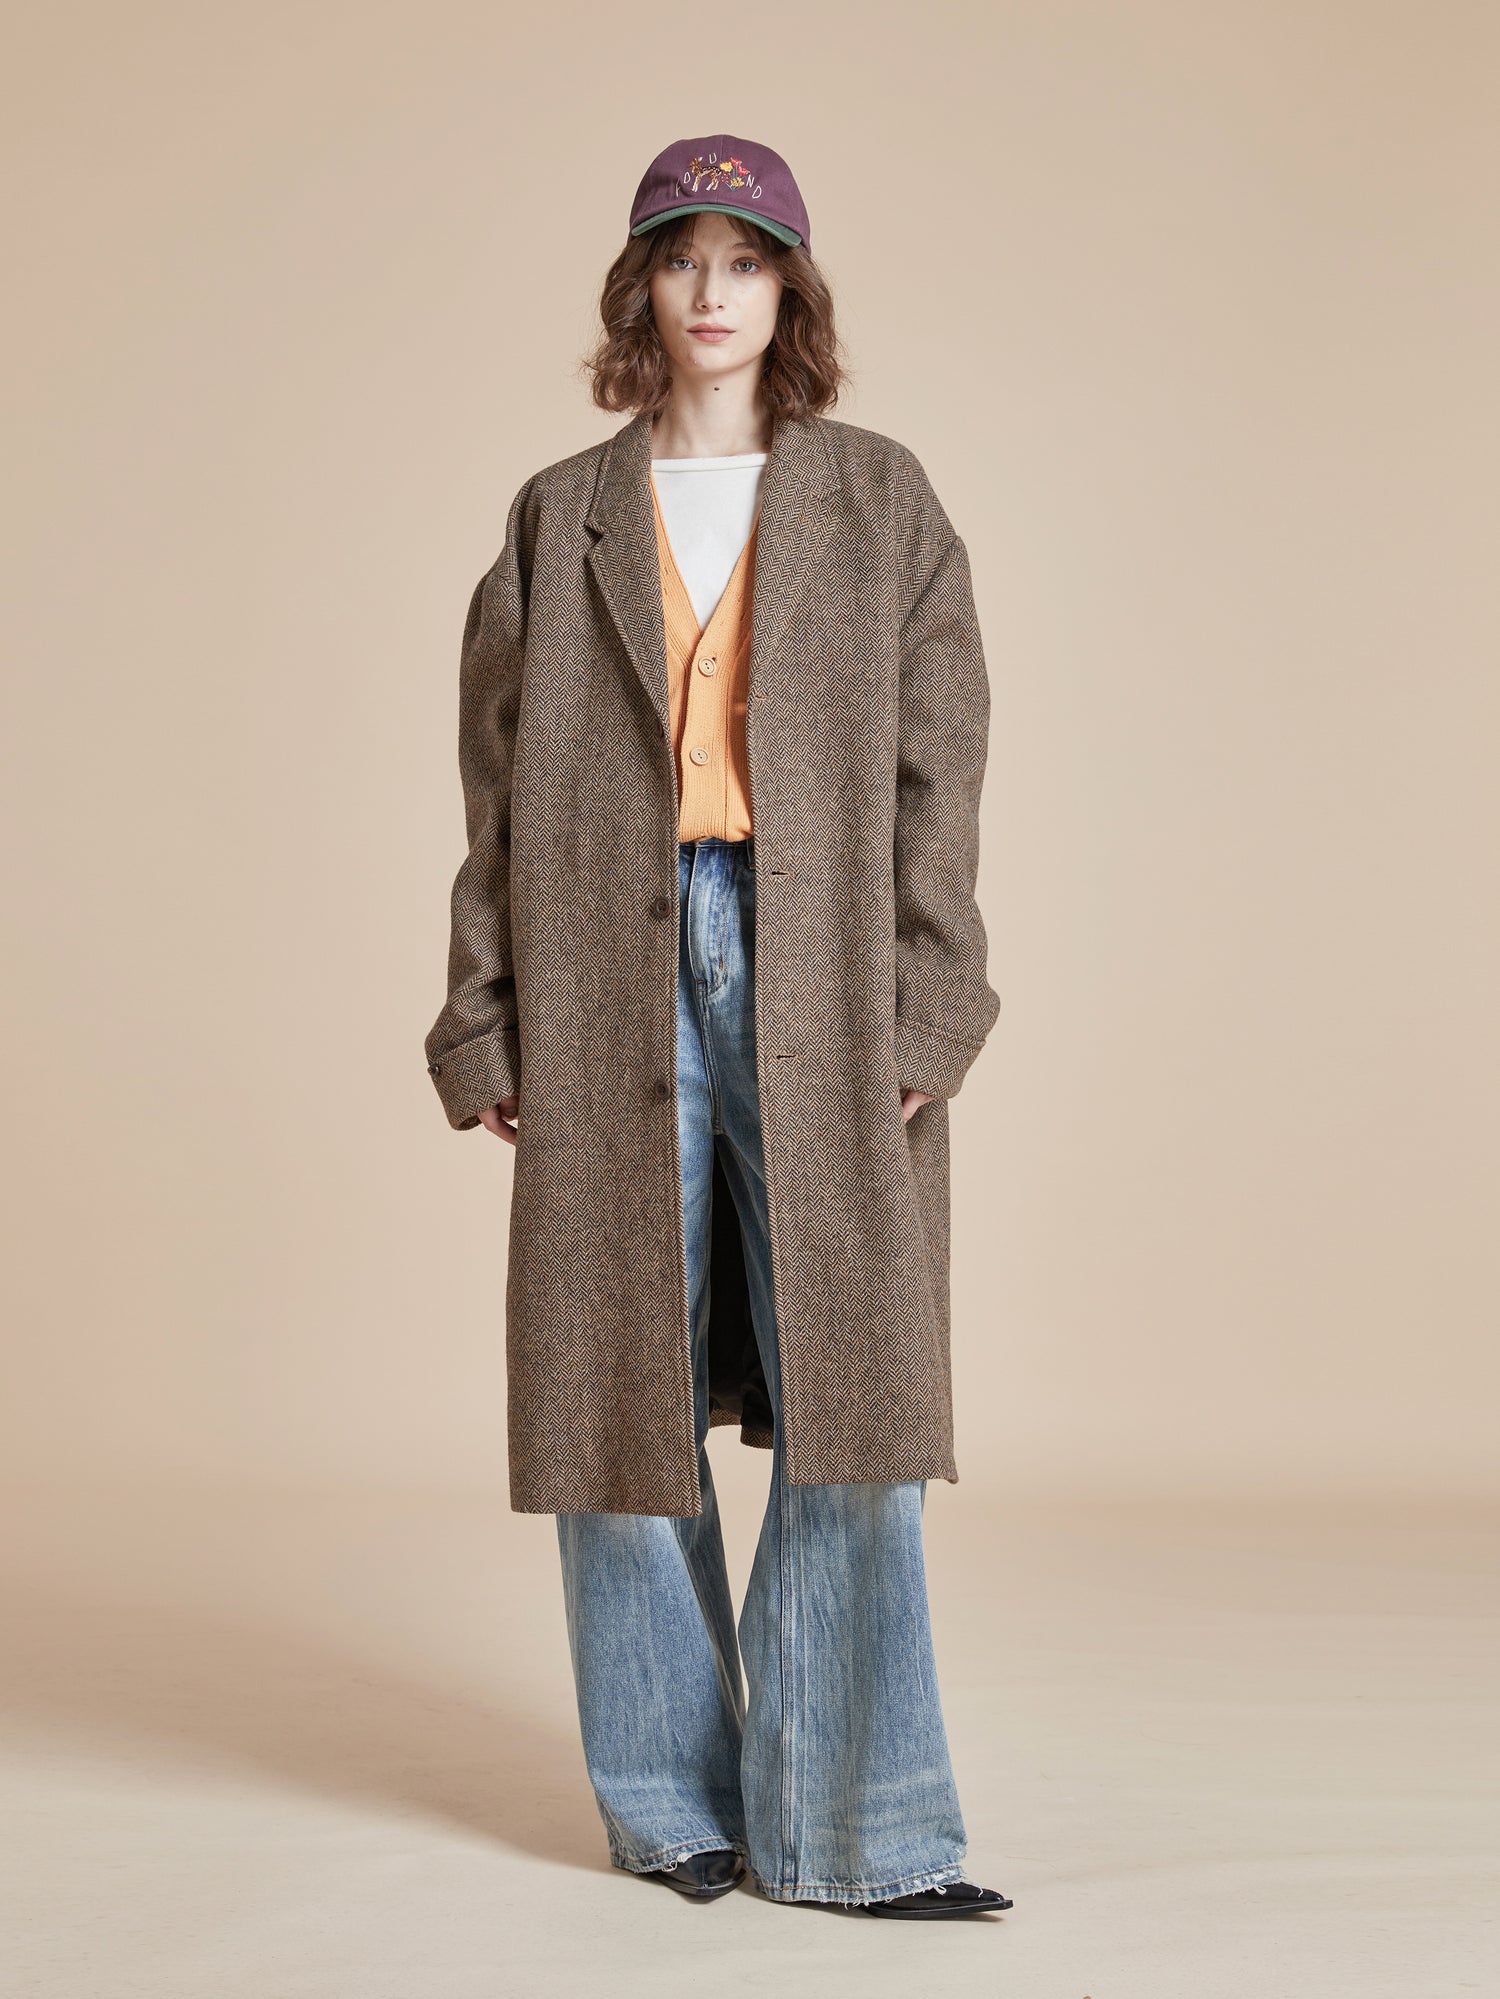 A woman in a warm Elm Tweed Long Top Coat by Found.